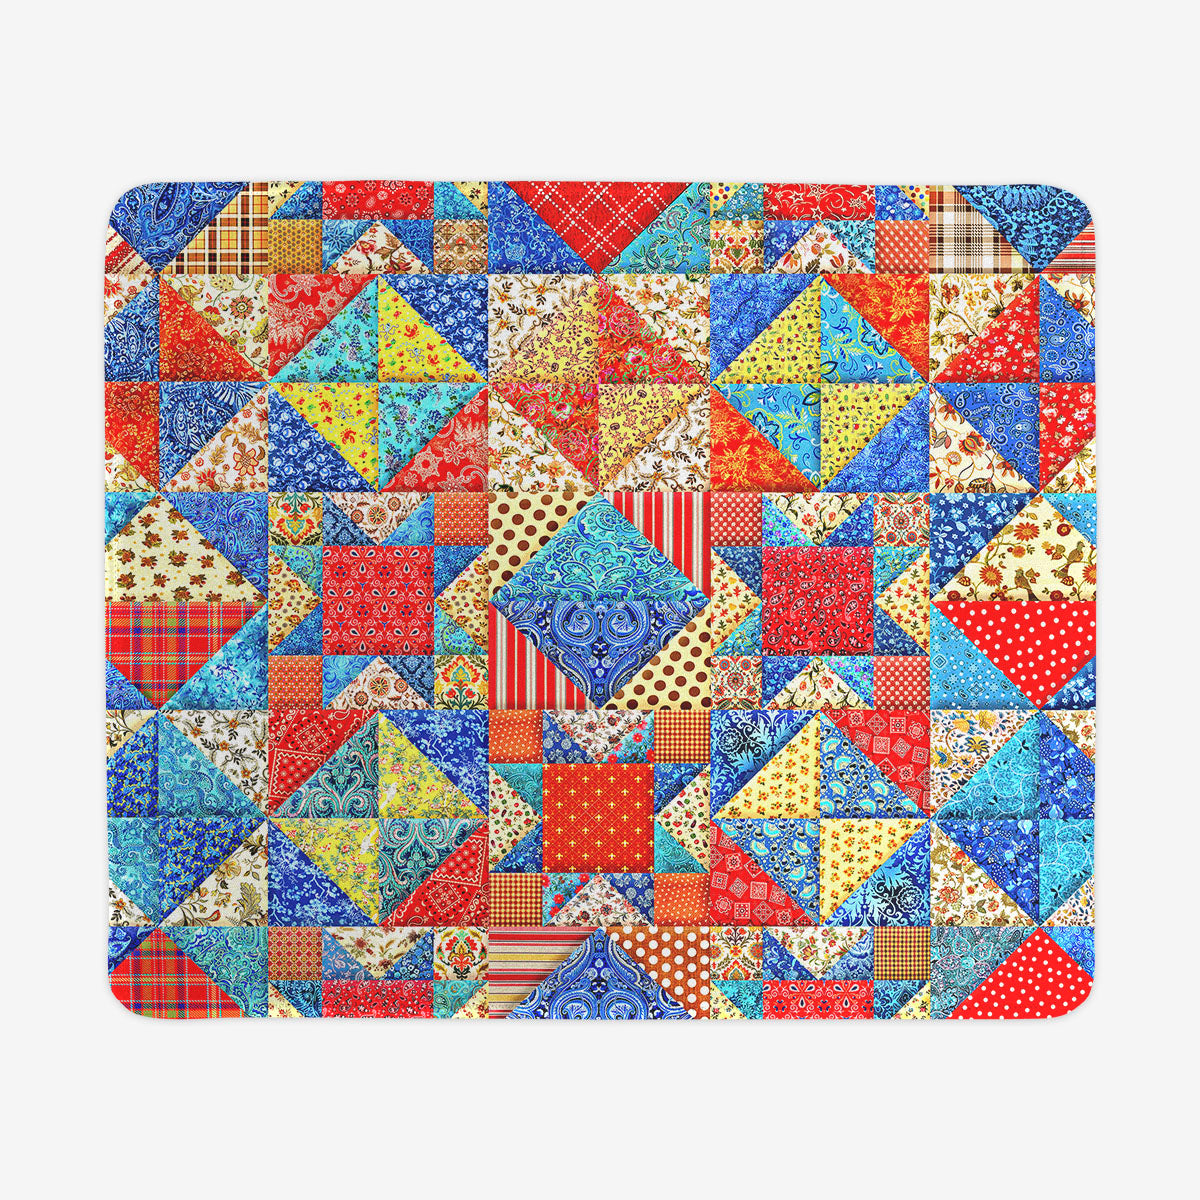 Amish Quilt Mousepad – Inked